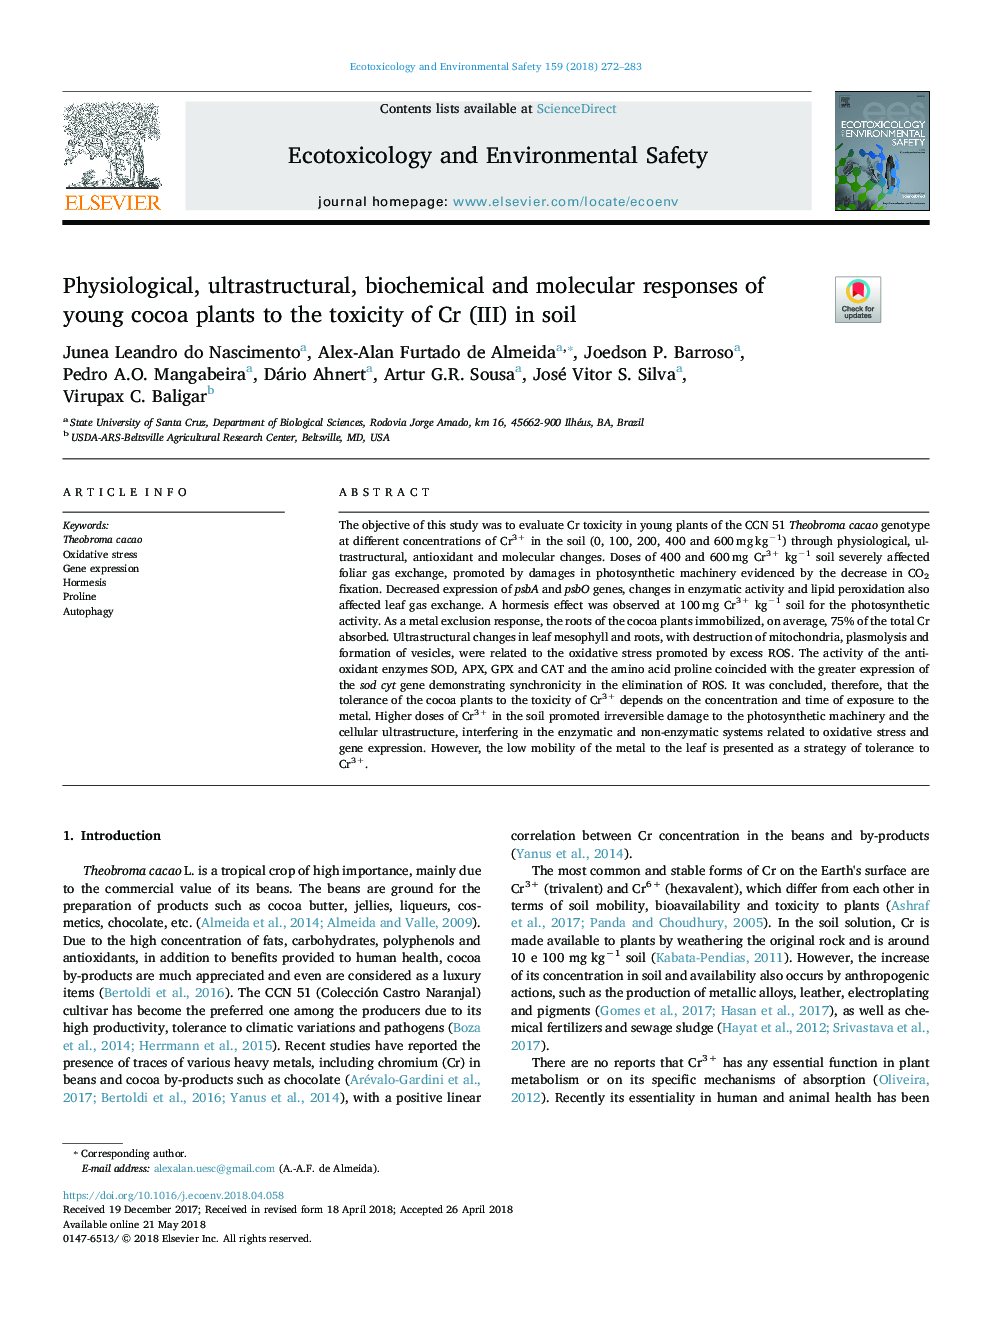 Physiological, ultrastructural, biochemical and molecular responses of young cocoa plants to the toxicity of Cr (III) in soil